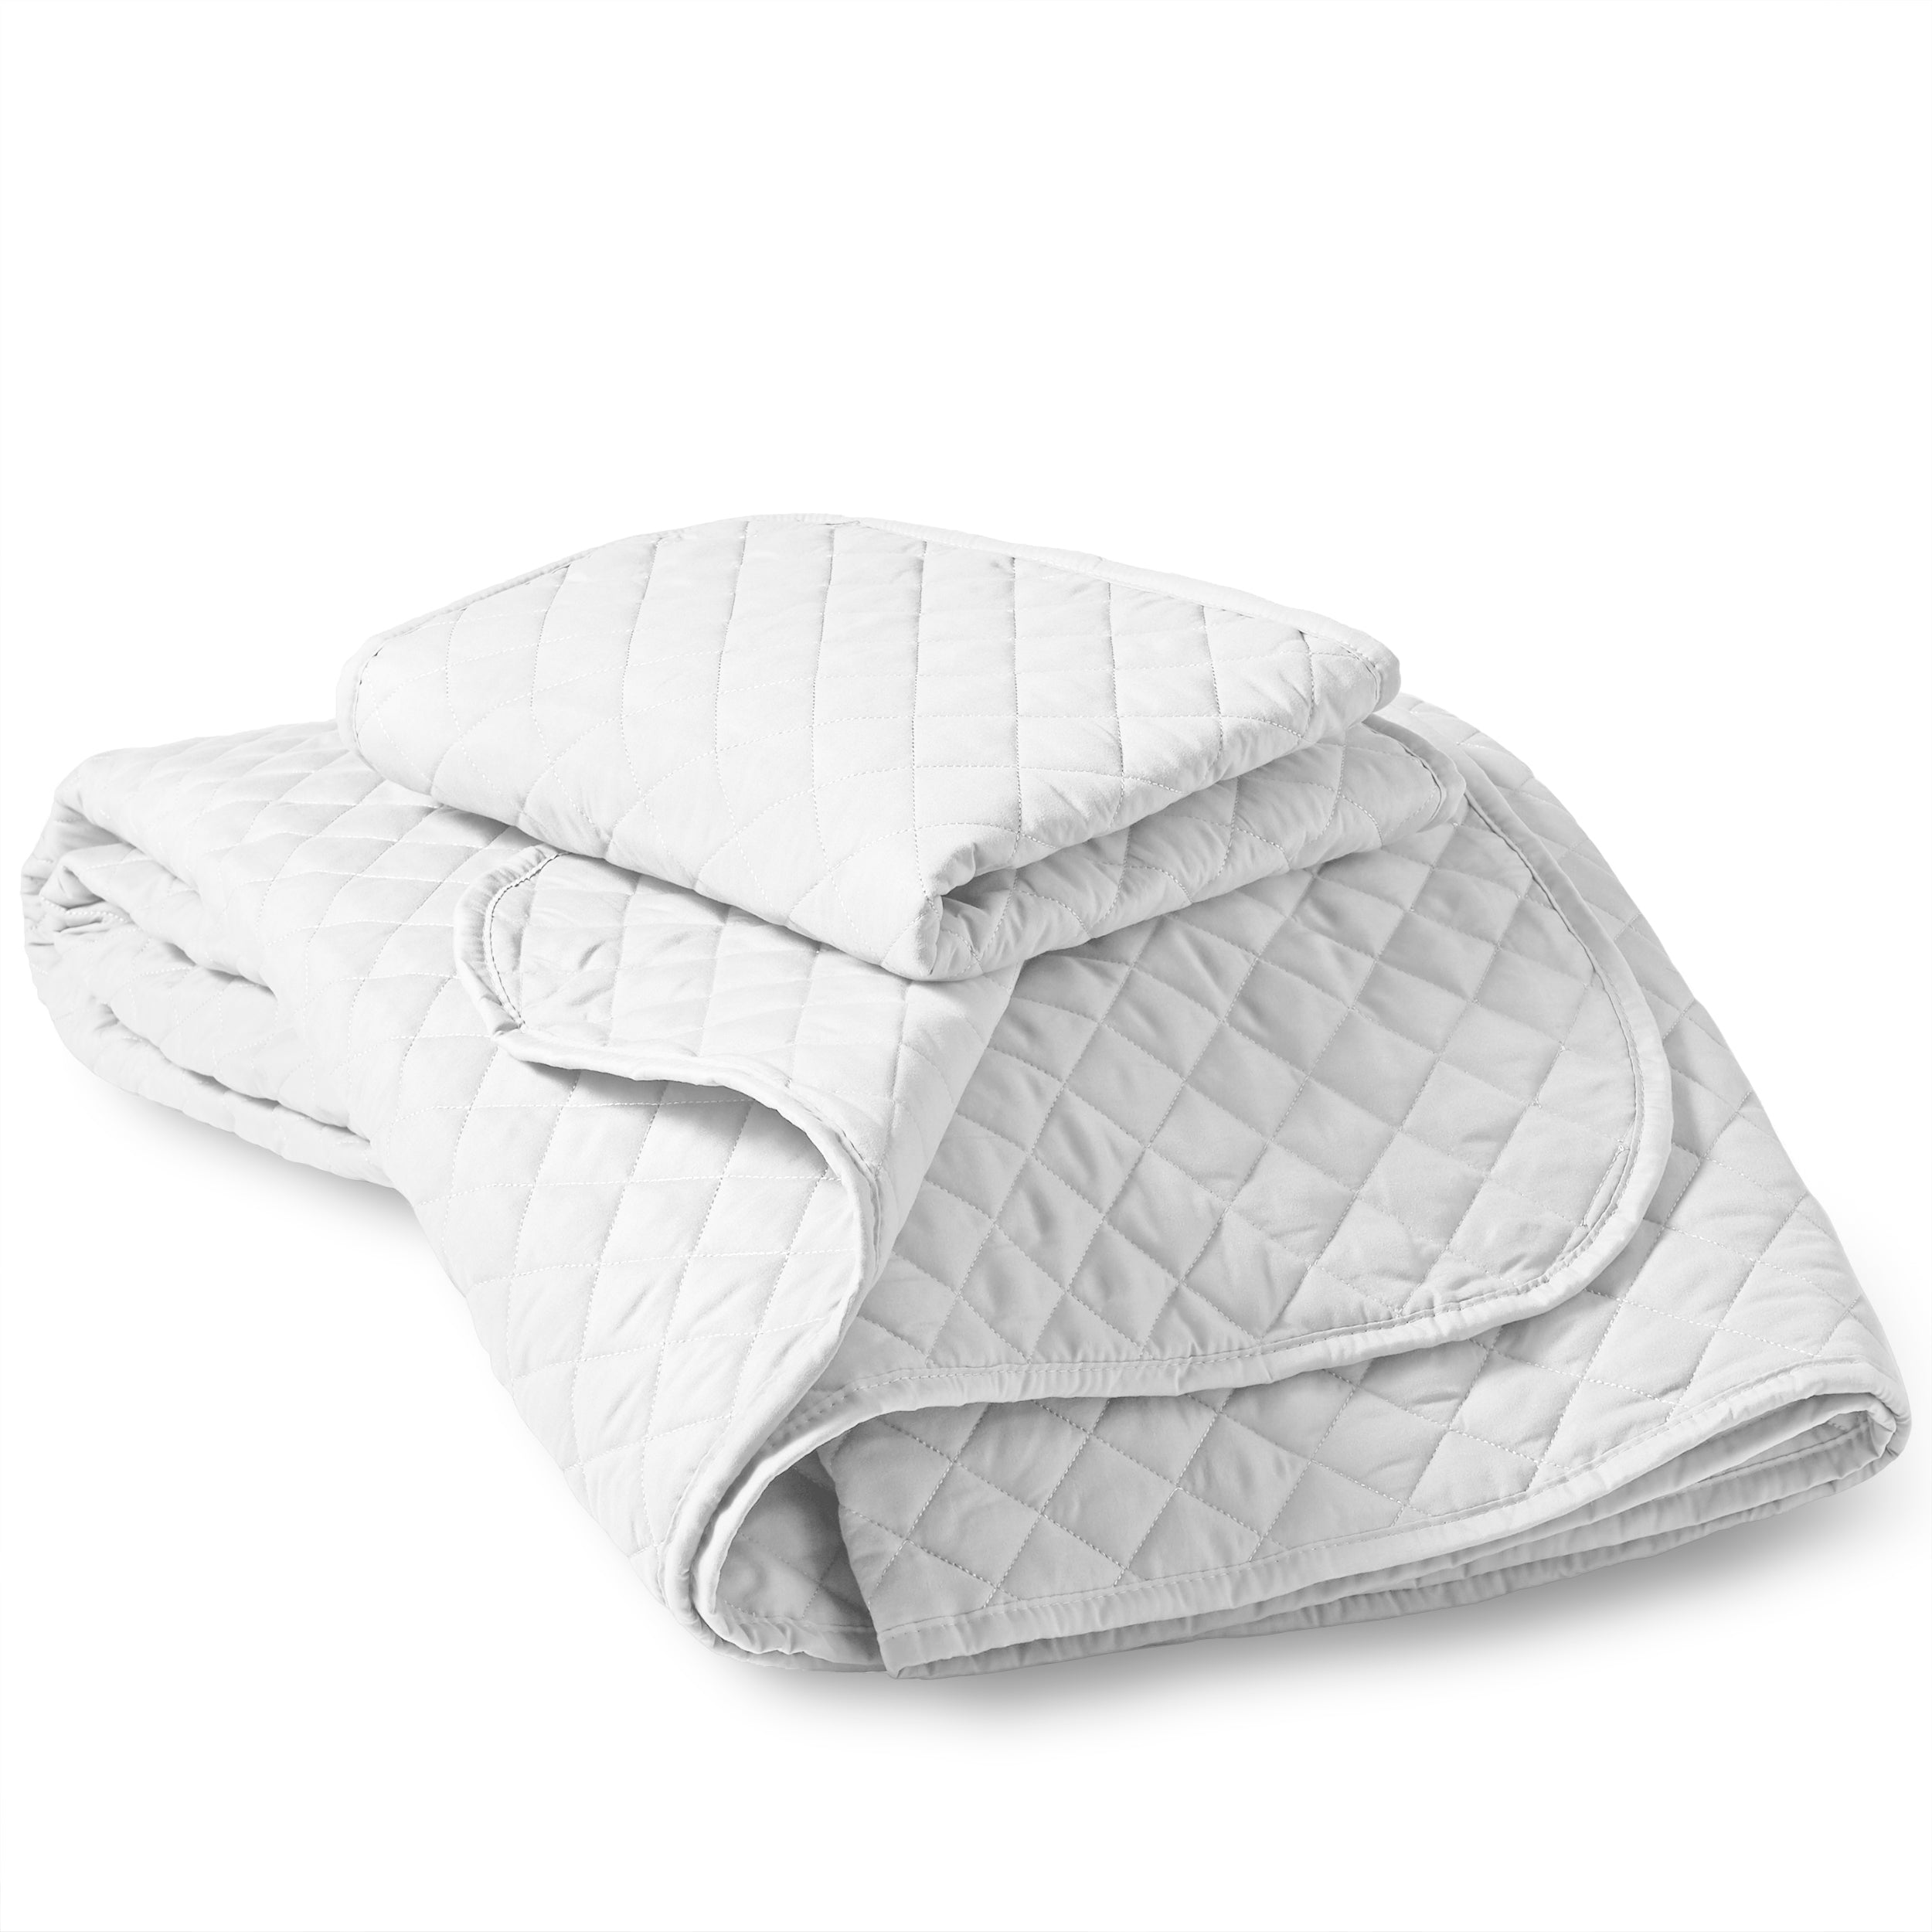 Microfiber quilt with matching pillow sham stacked on top